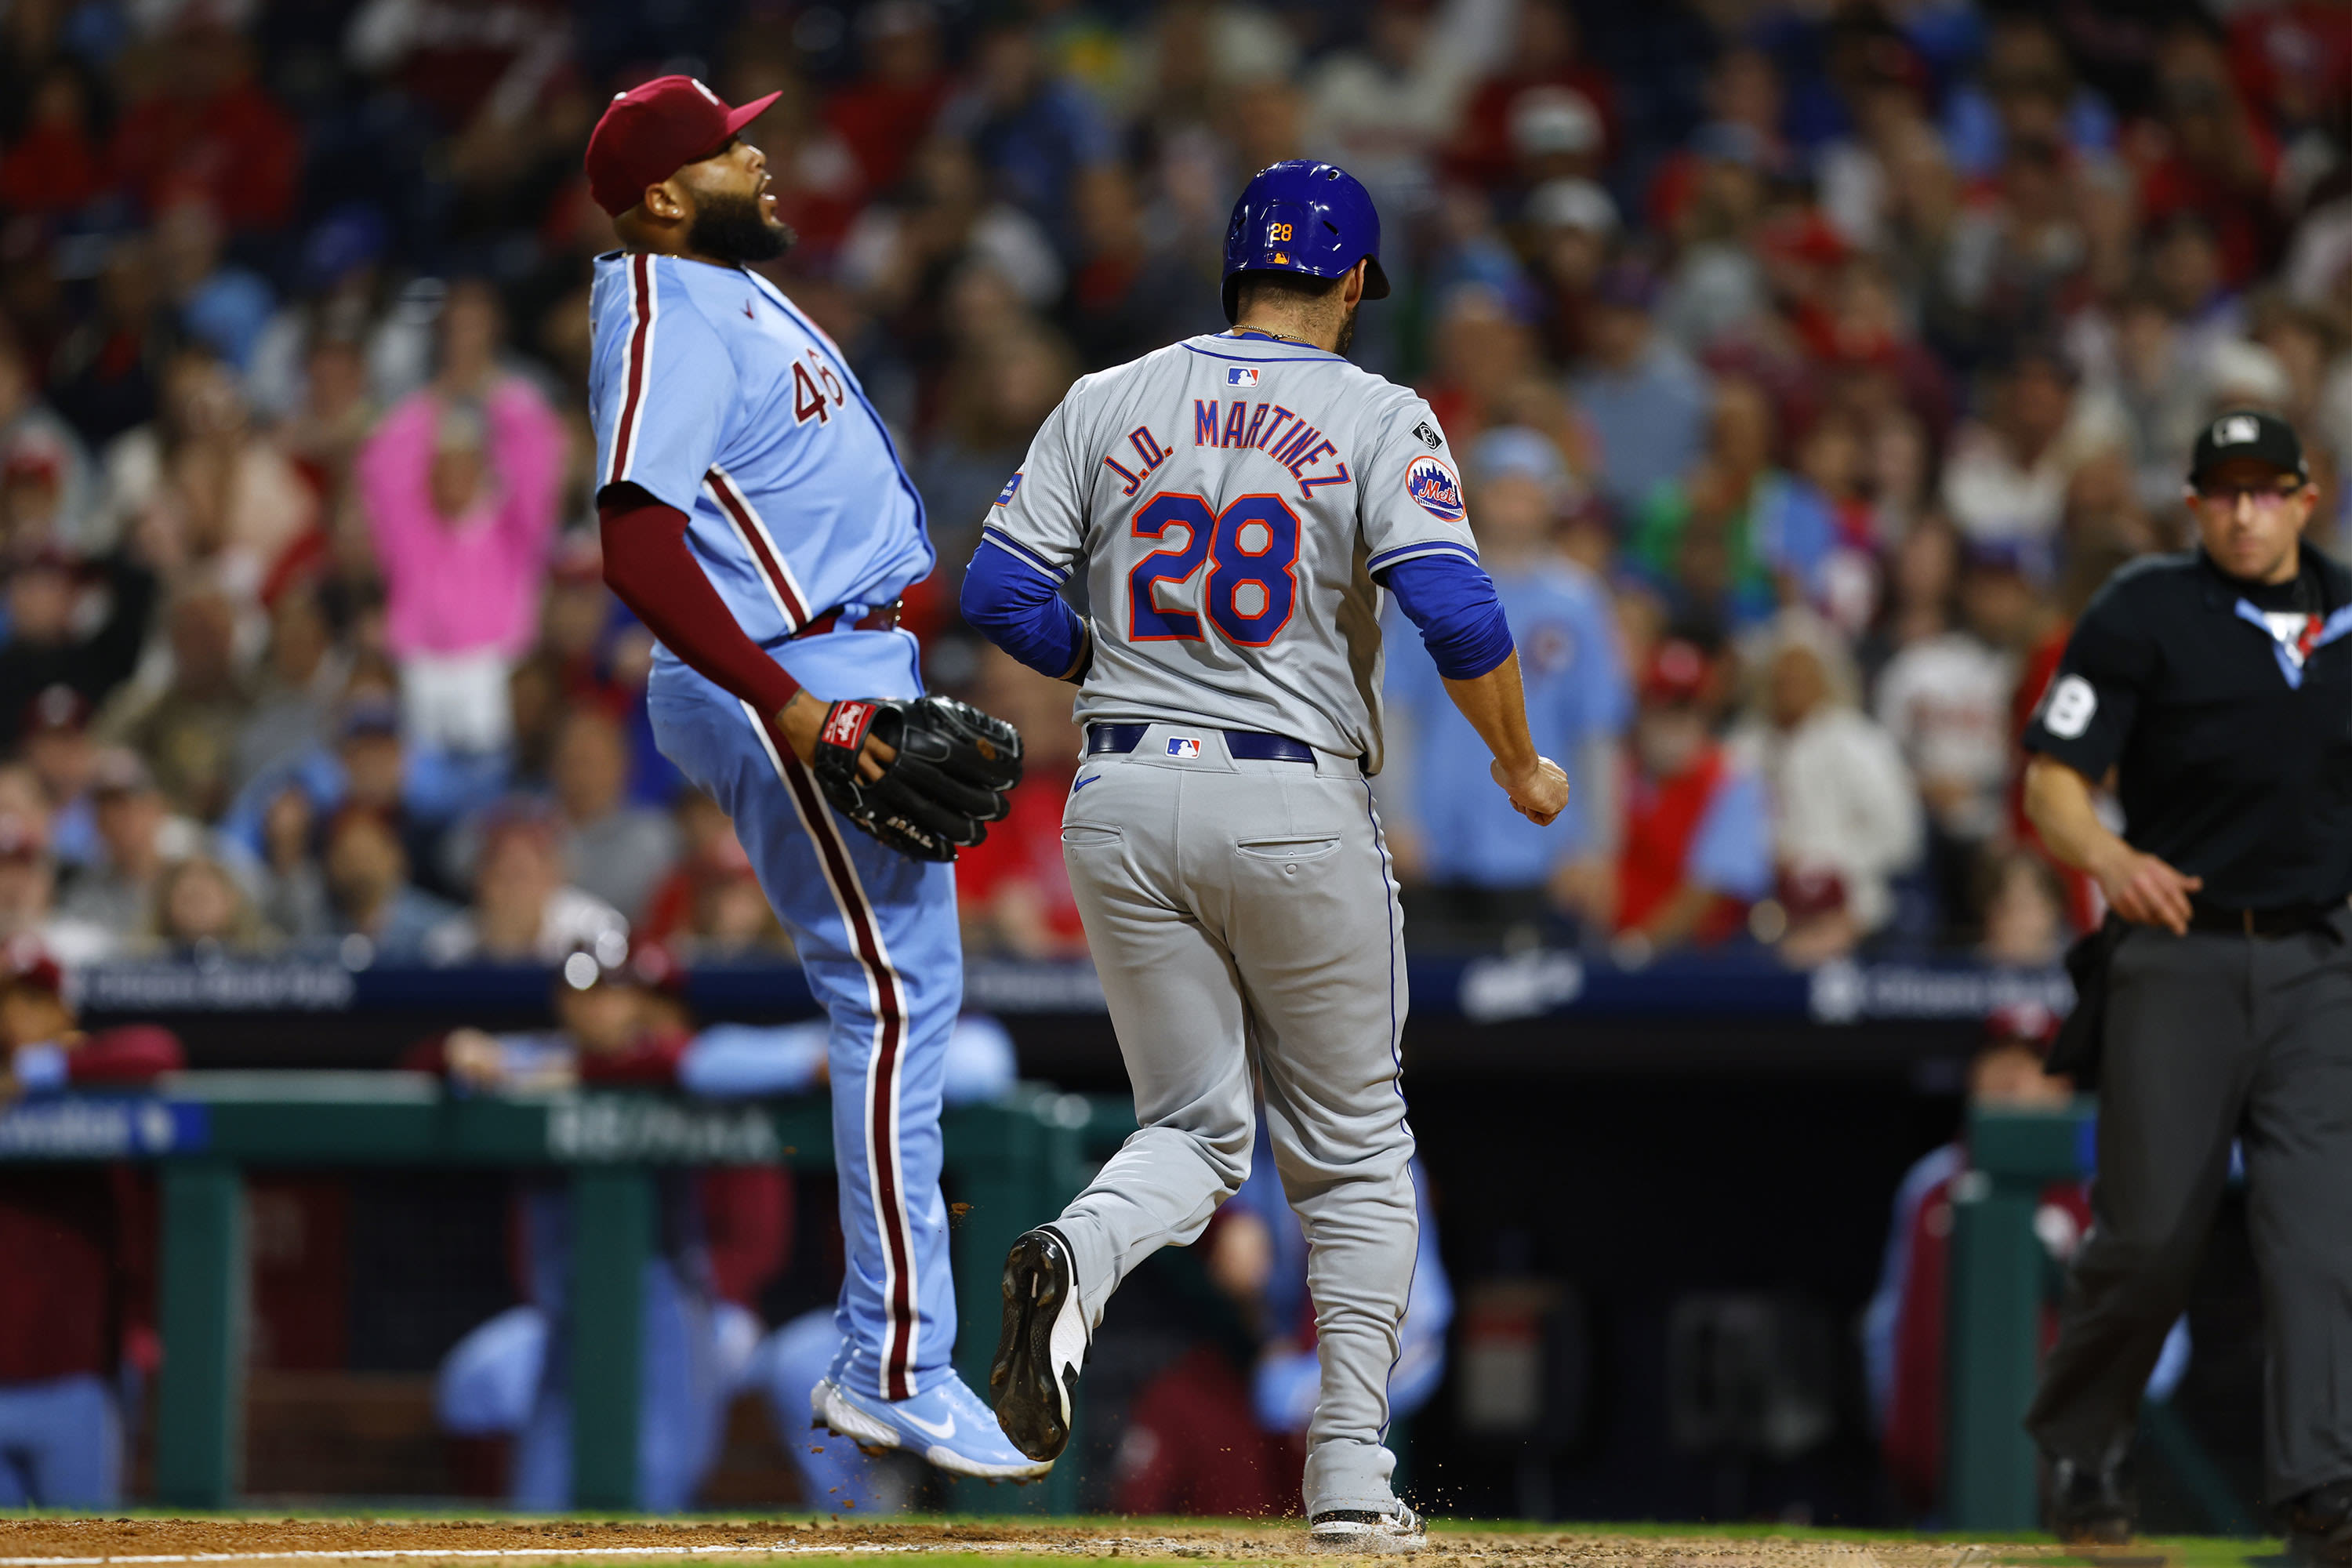 Mets blow two leads before J.D. Martinez’s go-ahead RBI single leads to win over Phillies in 11 innings